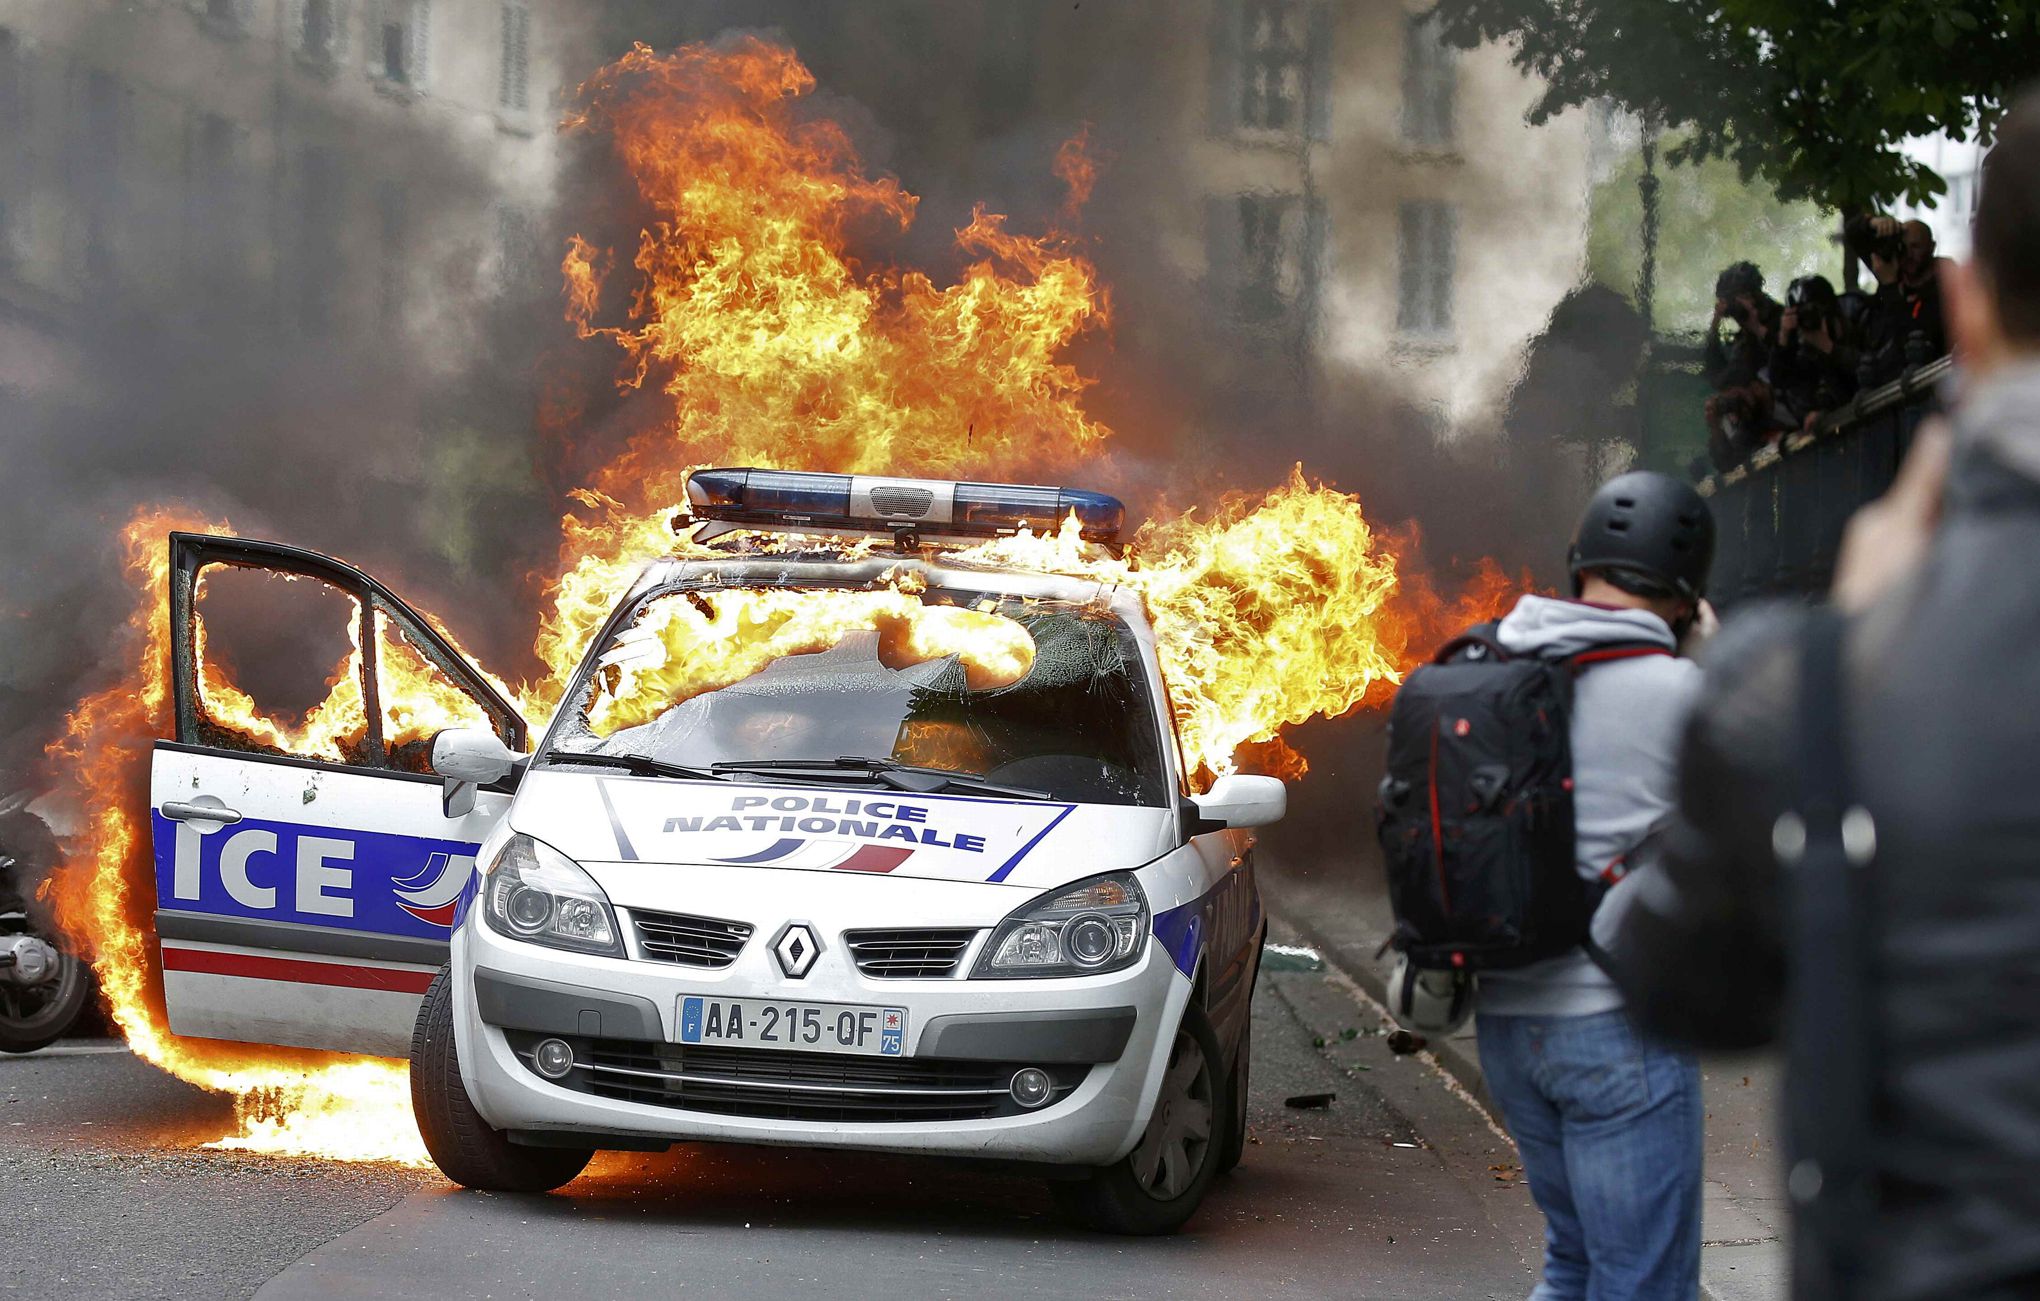 A police car burns during a demonstration against police violence and against French labour law reform in Paris, France, May 18, 2016. REUTERS/Charles Platiau